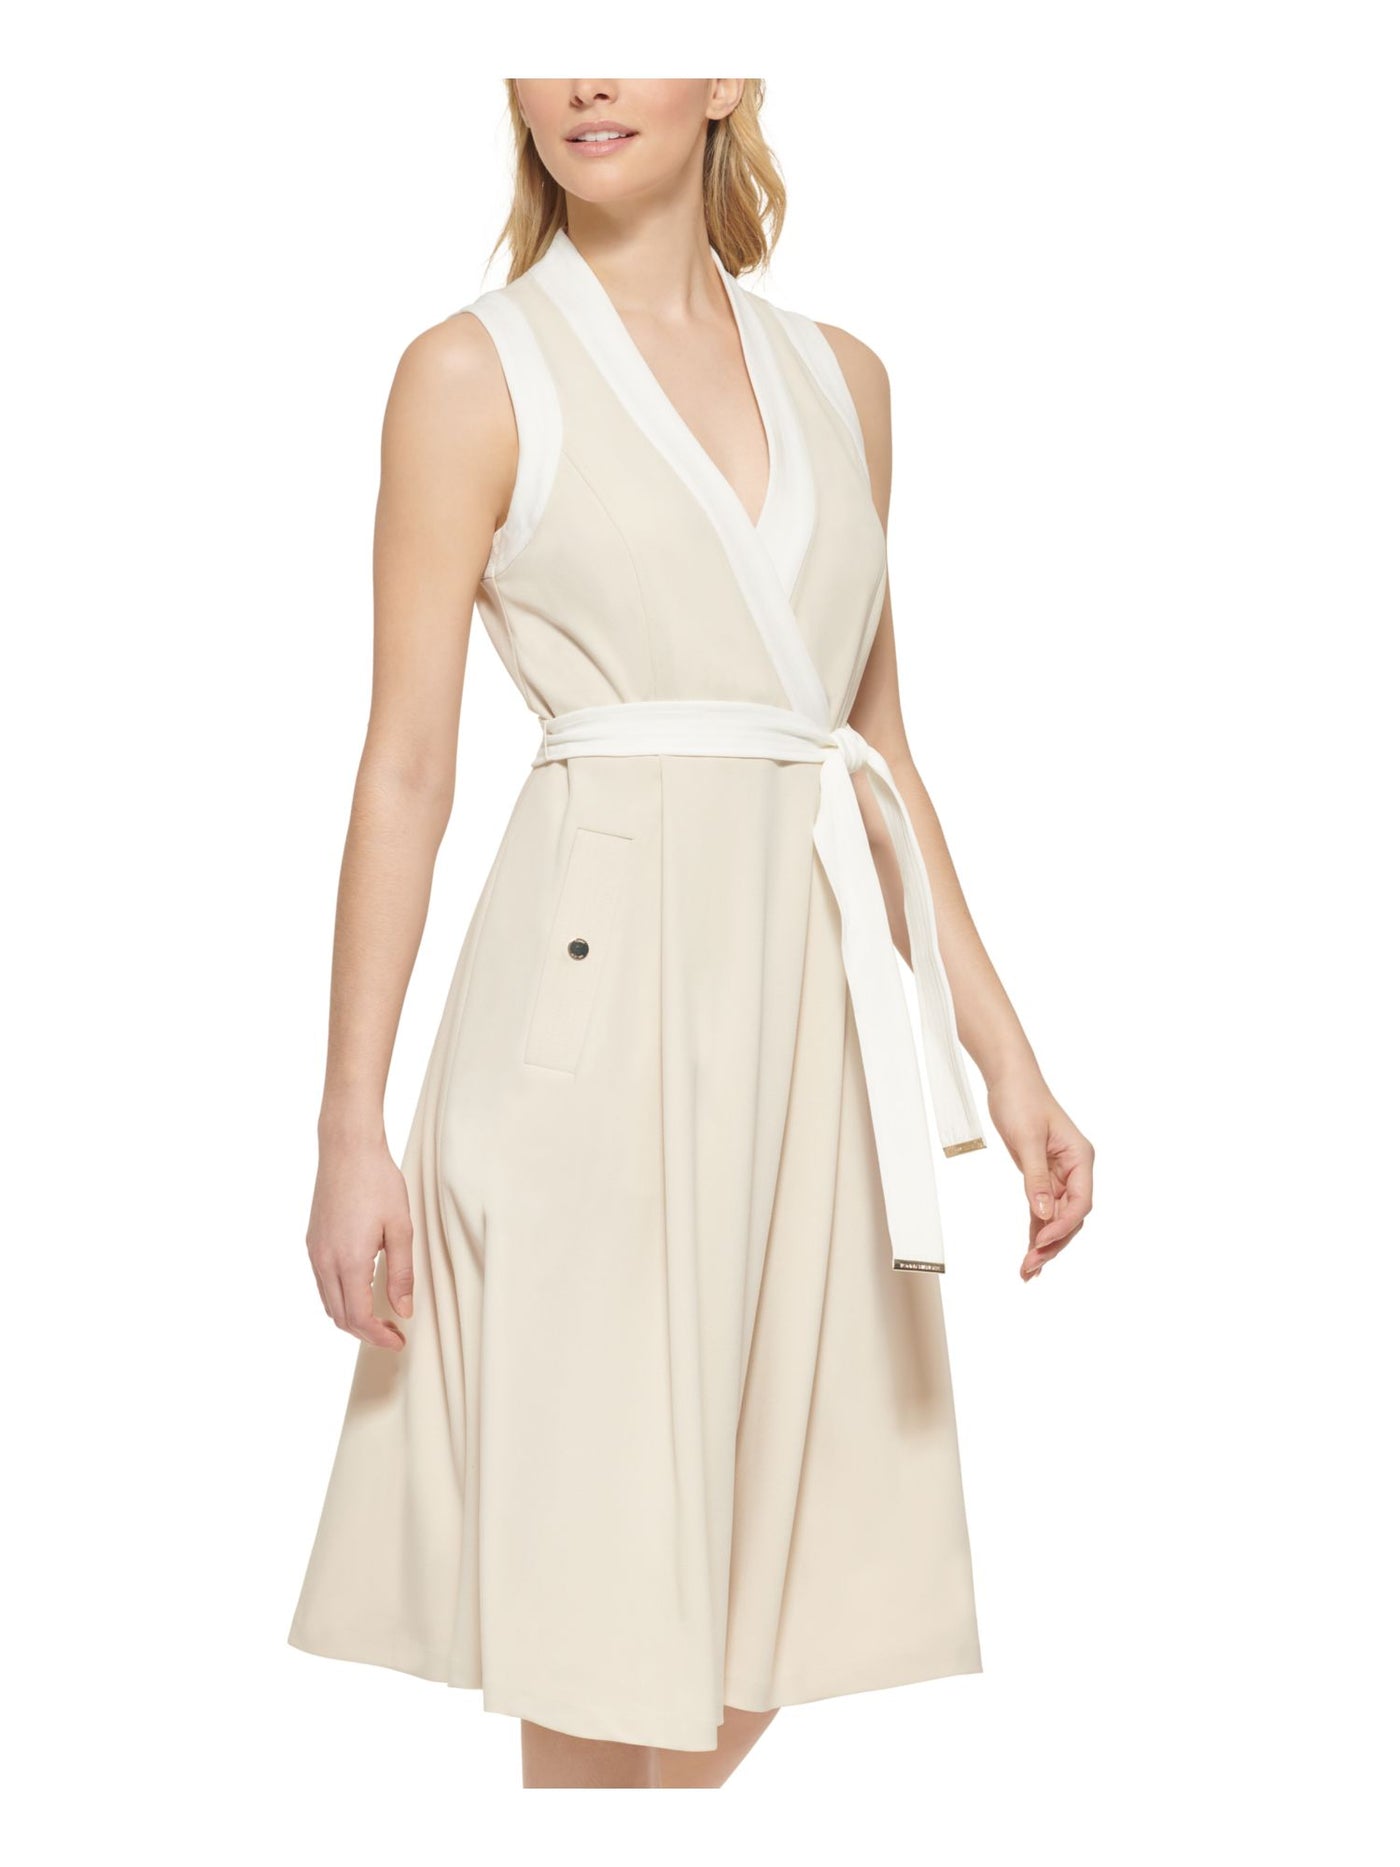 TOMMY HILFIGER Womens Beige Zippered Belted Partially Lined Pocketed Sleeveless Surplice Neckline Below The Knee Fit + Flare Dress 2